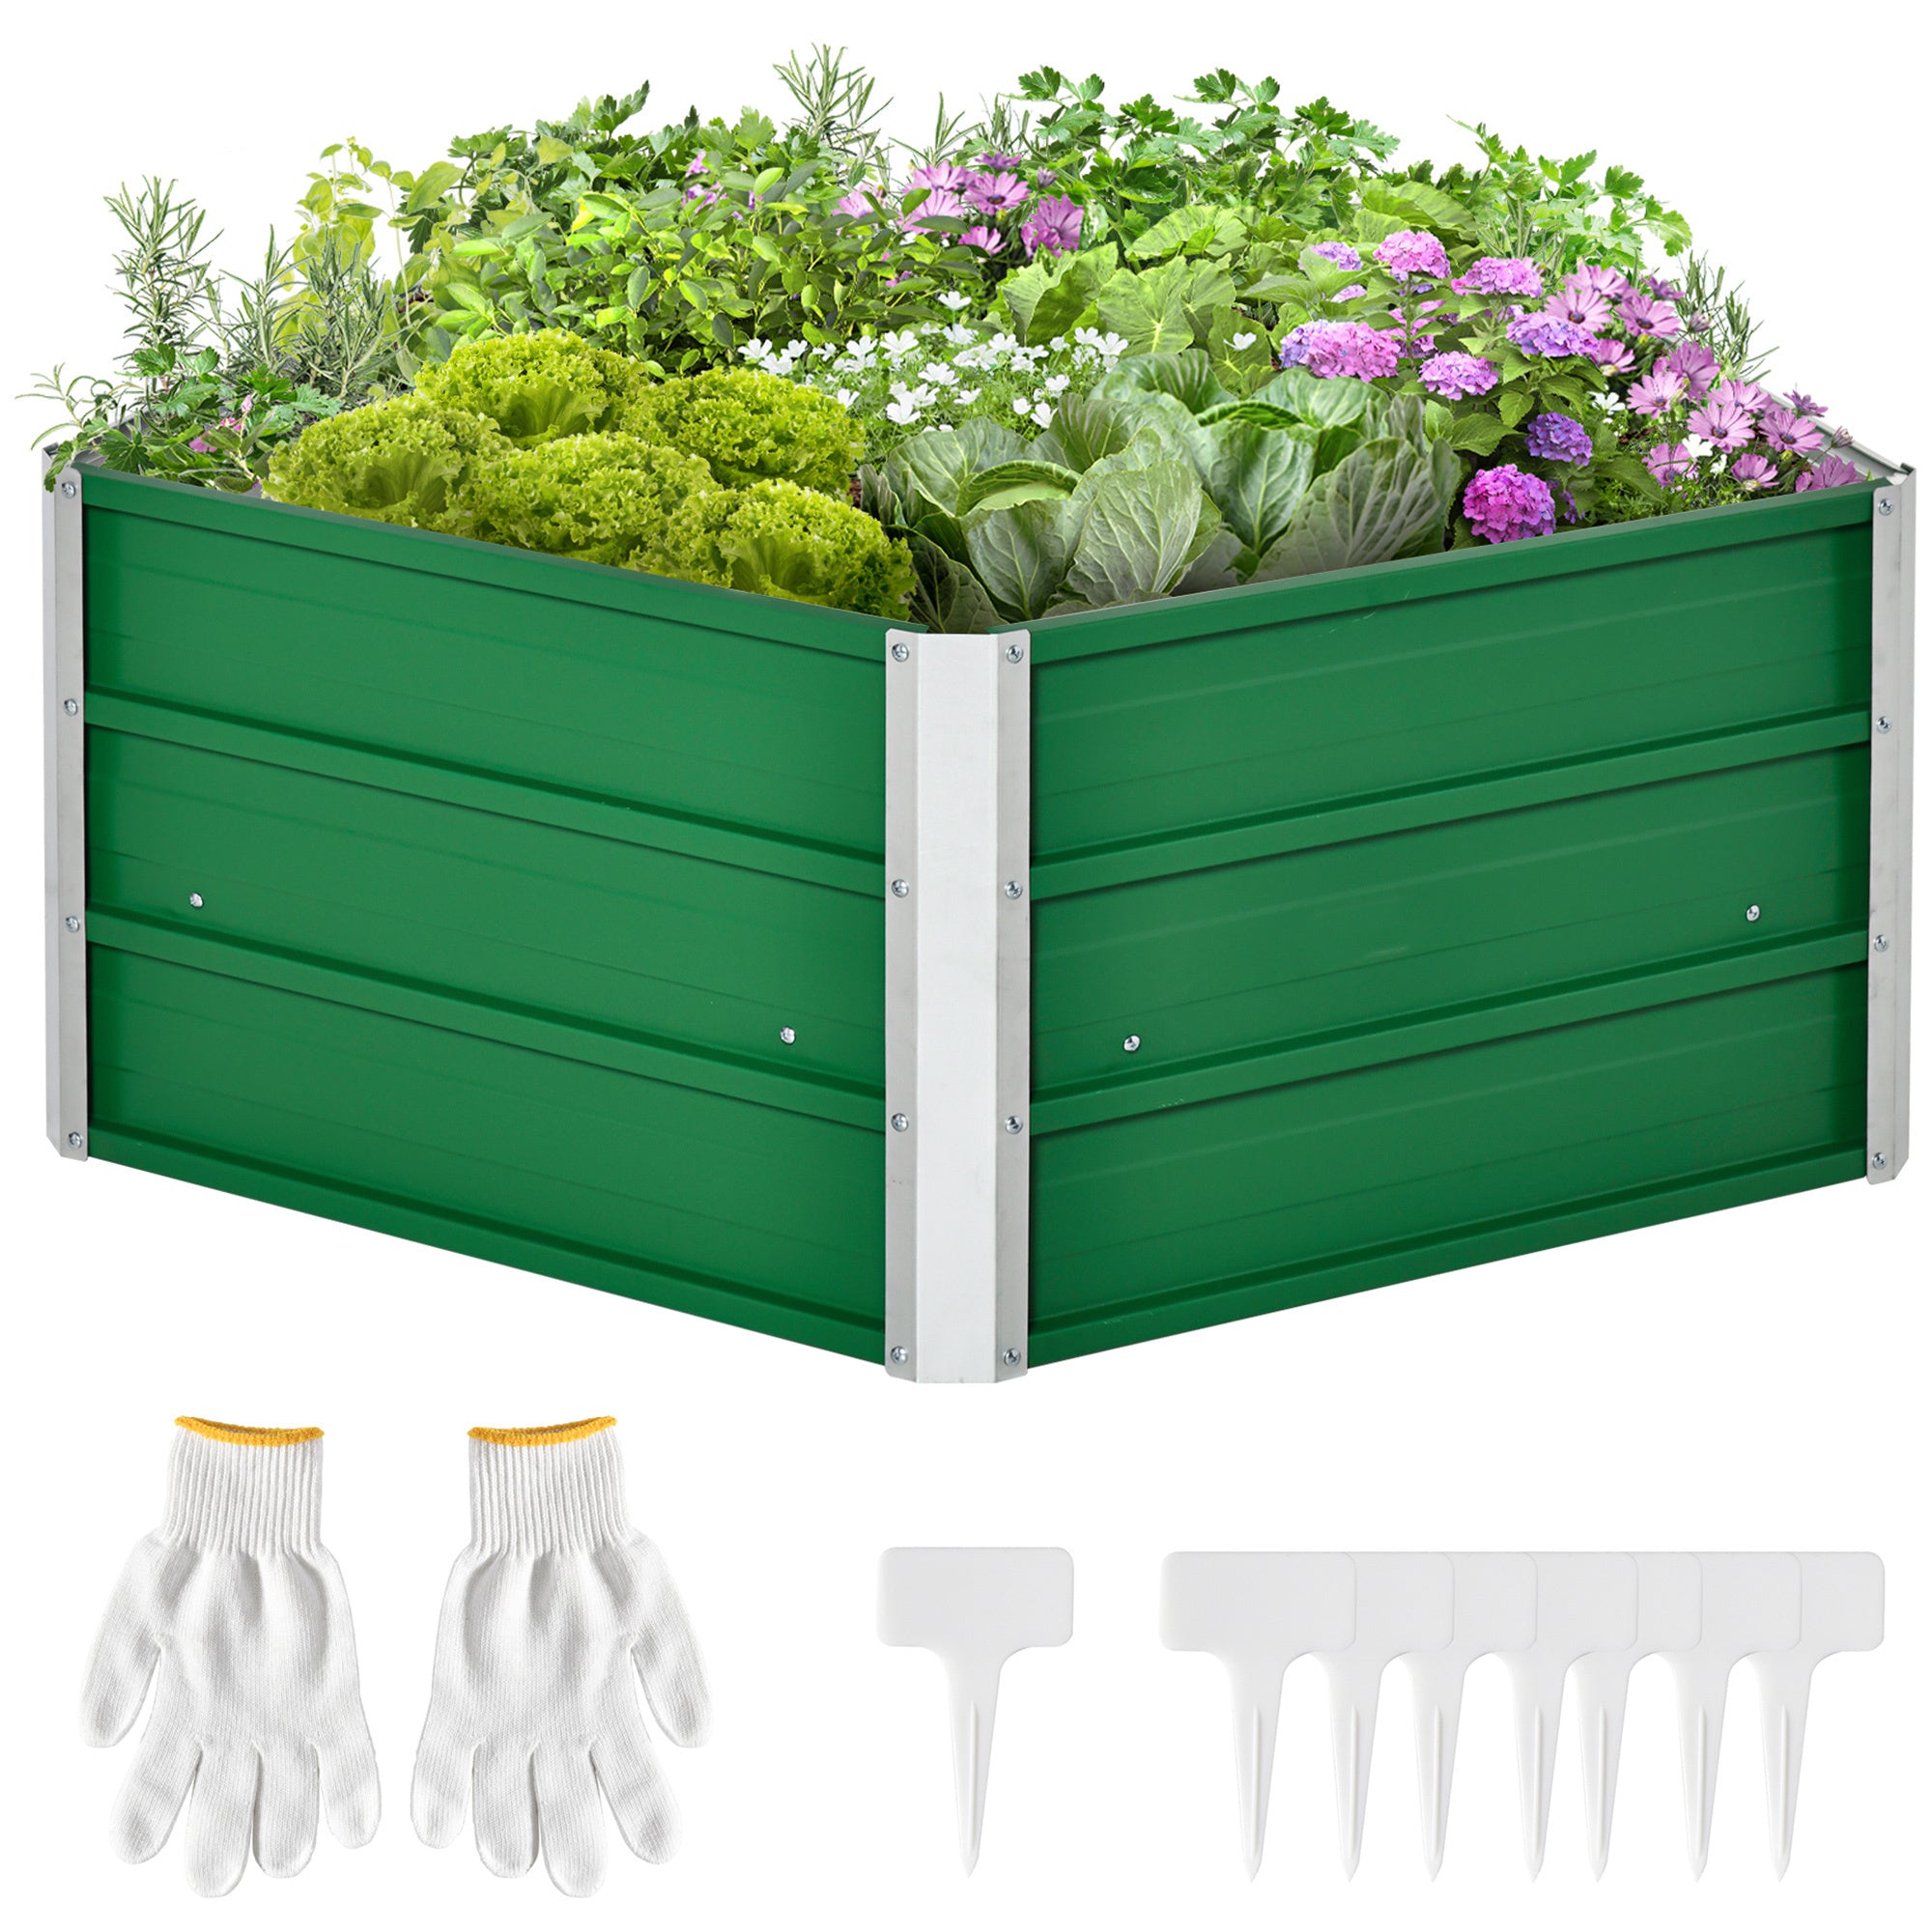 40''-x-16''-Hexagon-Metal-Raised-Garden-Bed,-Elevated-Large-Corrugated-Galvanized-Steel-Pots-&-Planters